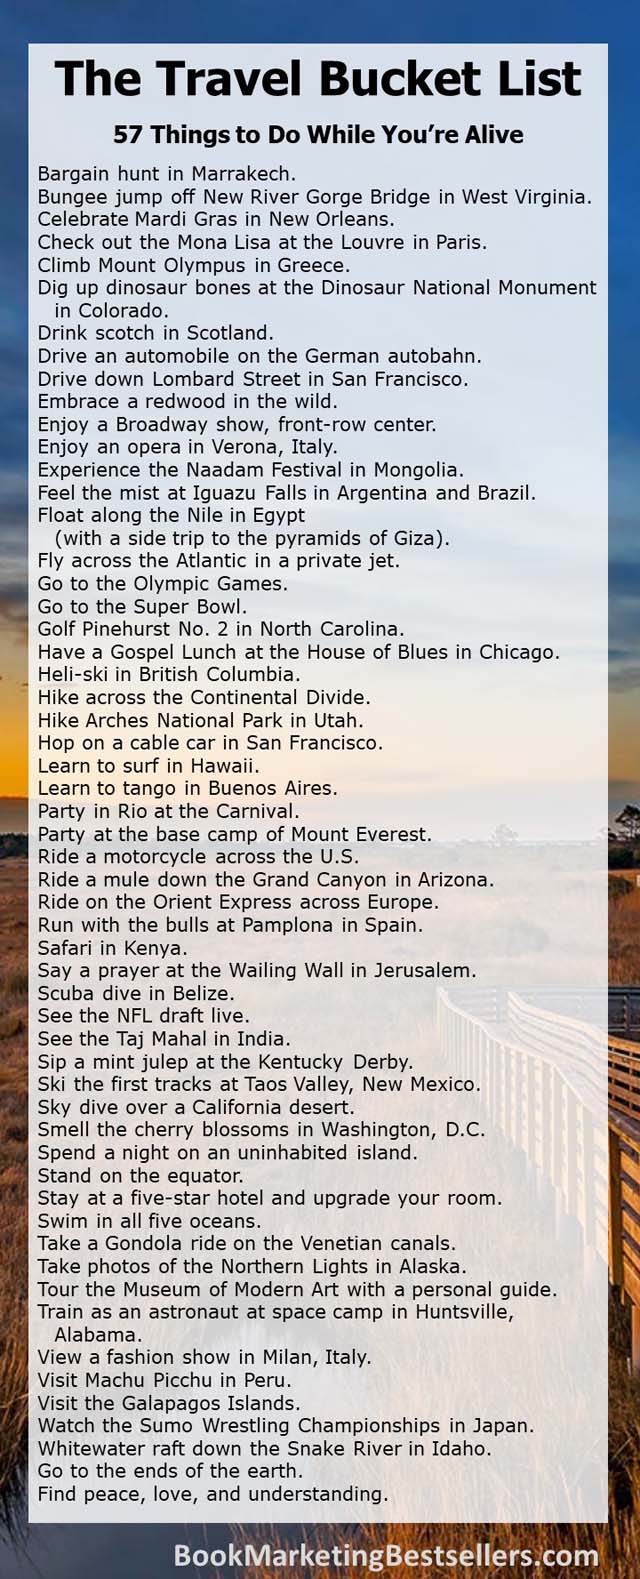 The Travel Bucket List: 57 things to do while you're alive - Check out this travel bucket list inspired by some old Visa Signature advertisements. How many of these 57 things to do while you're alive have you done?